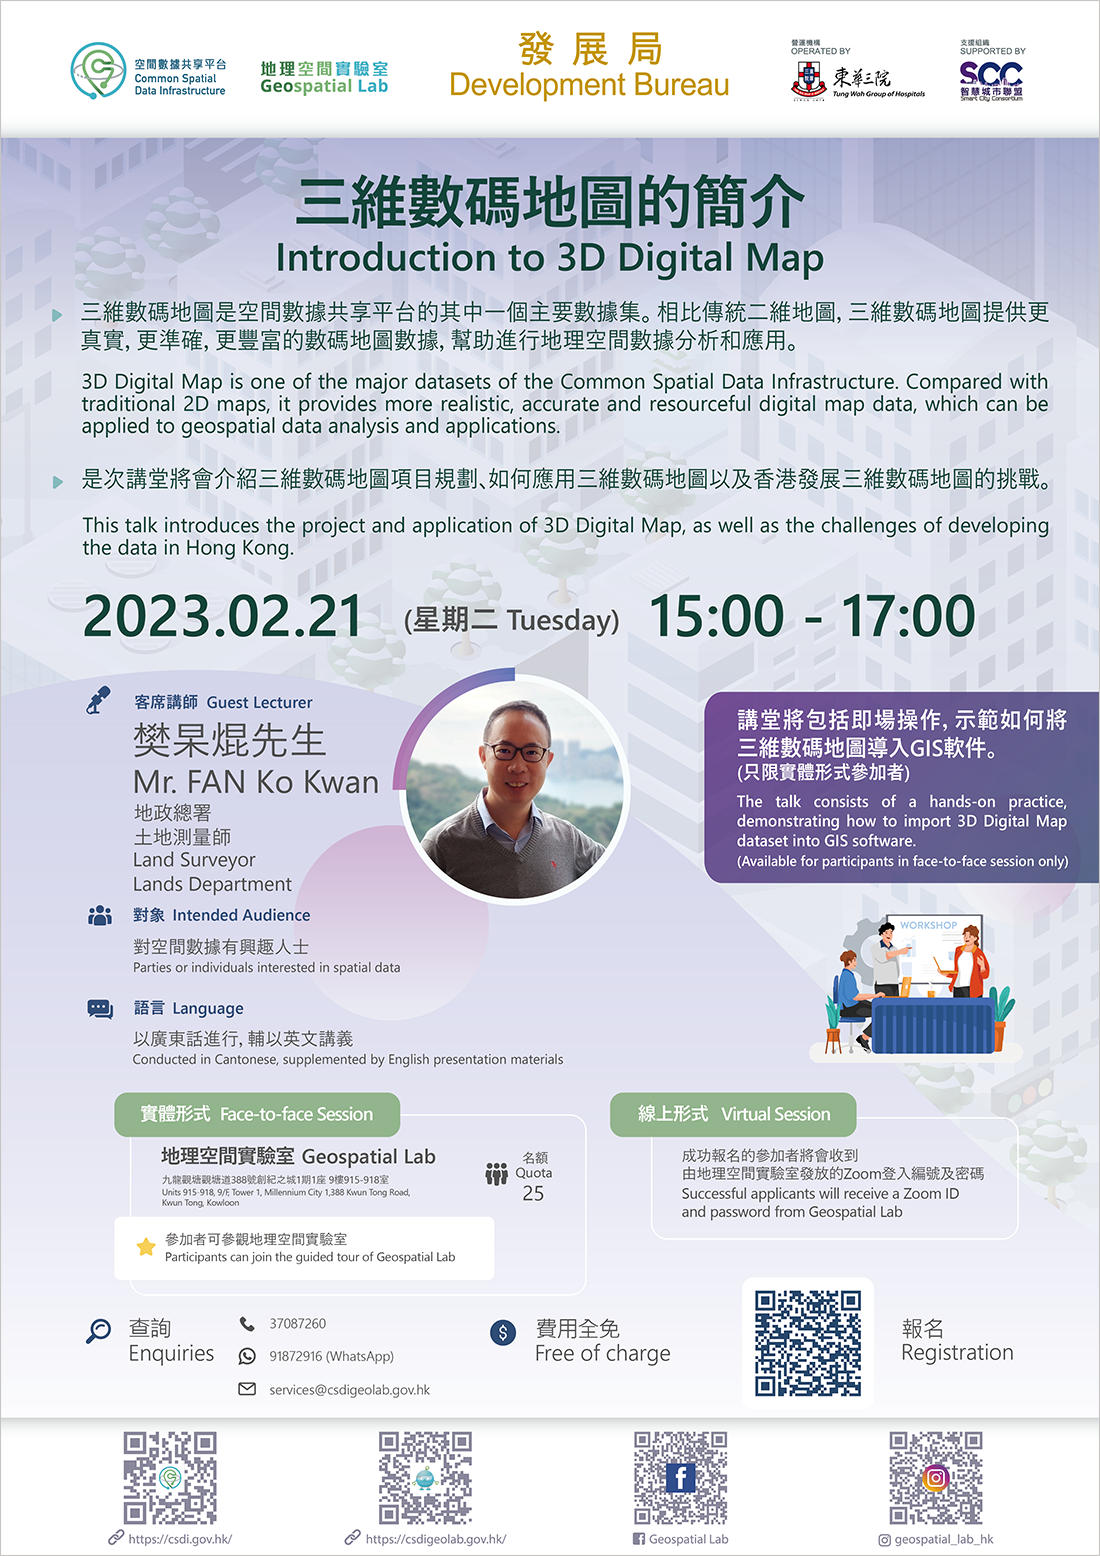 Introduction to 3D Digital Map